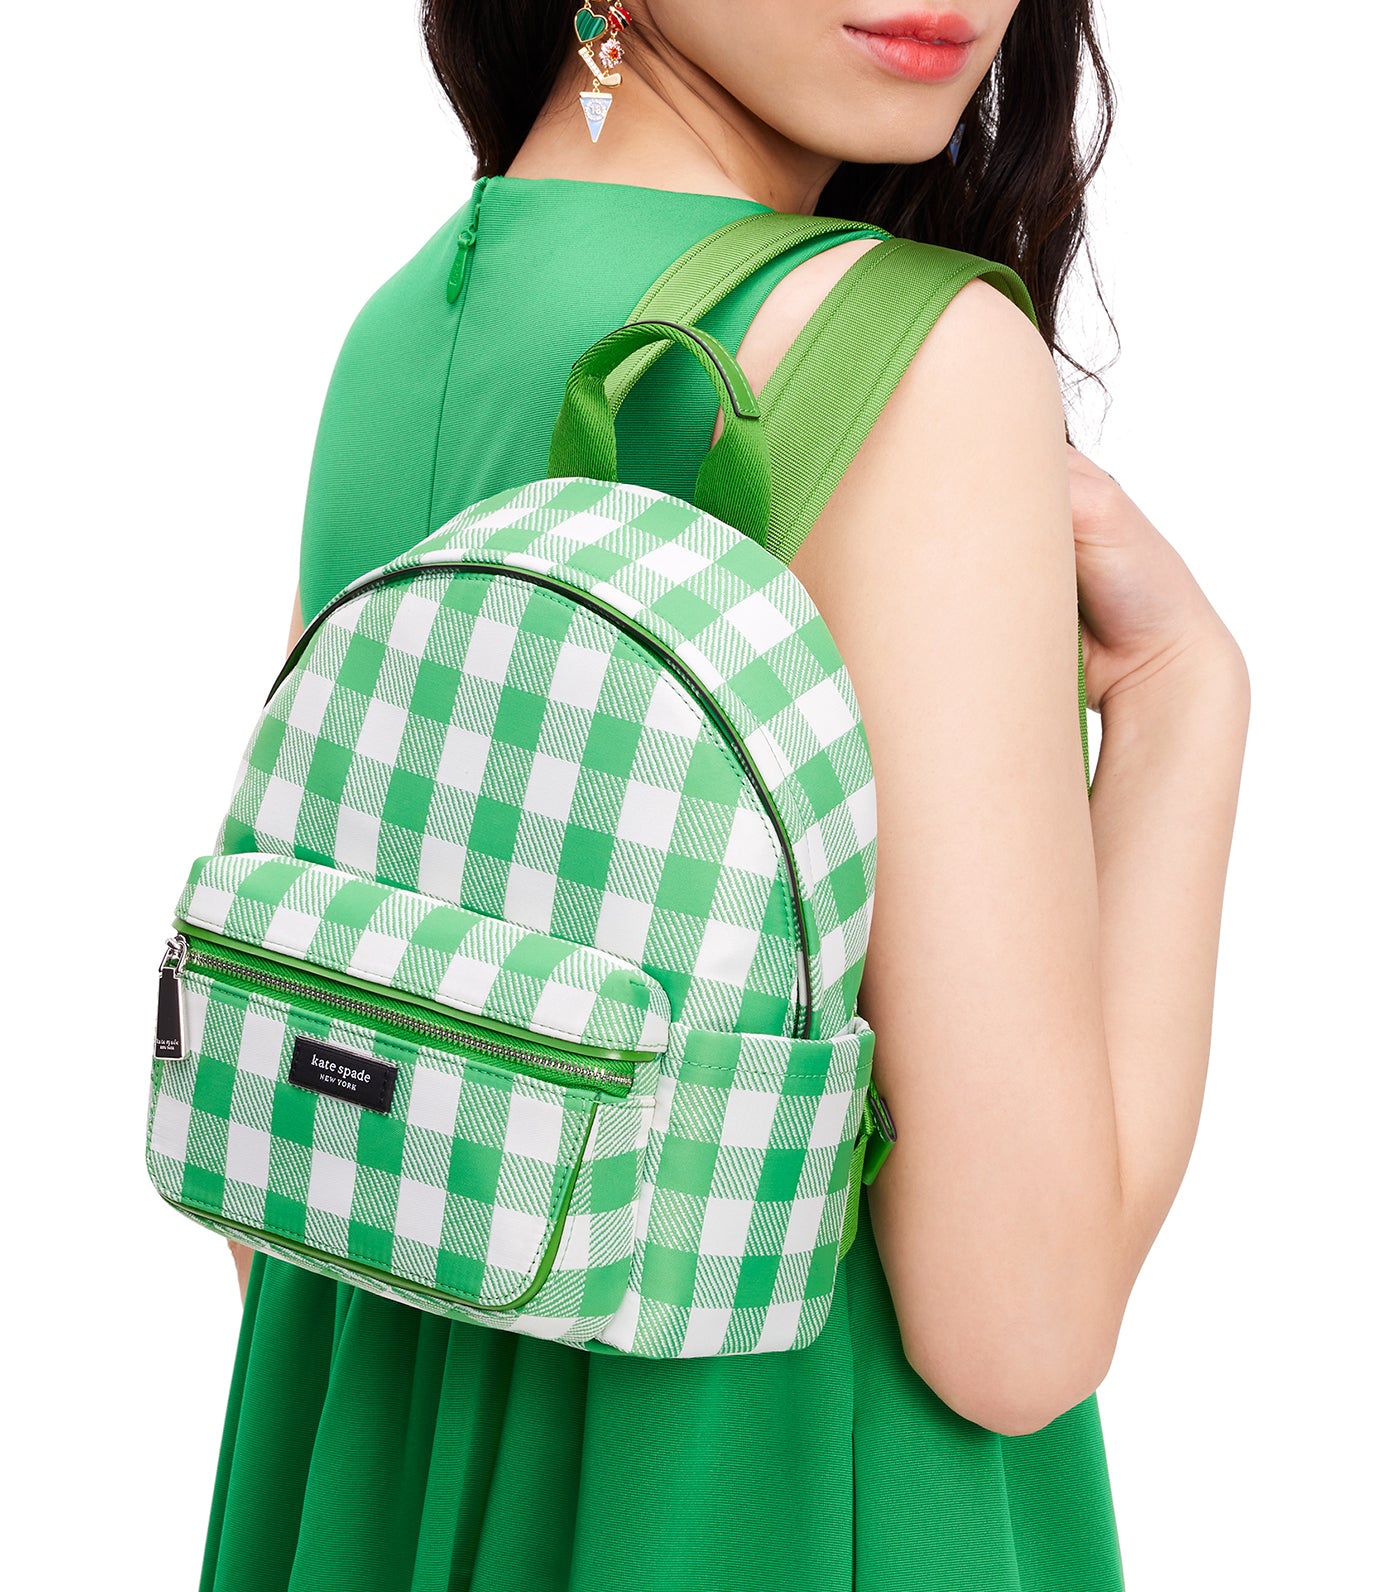 Sam Icon Gingham Printed Fabric Small Backpack Candy Grass Multi